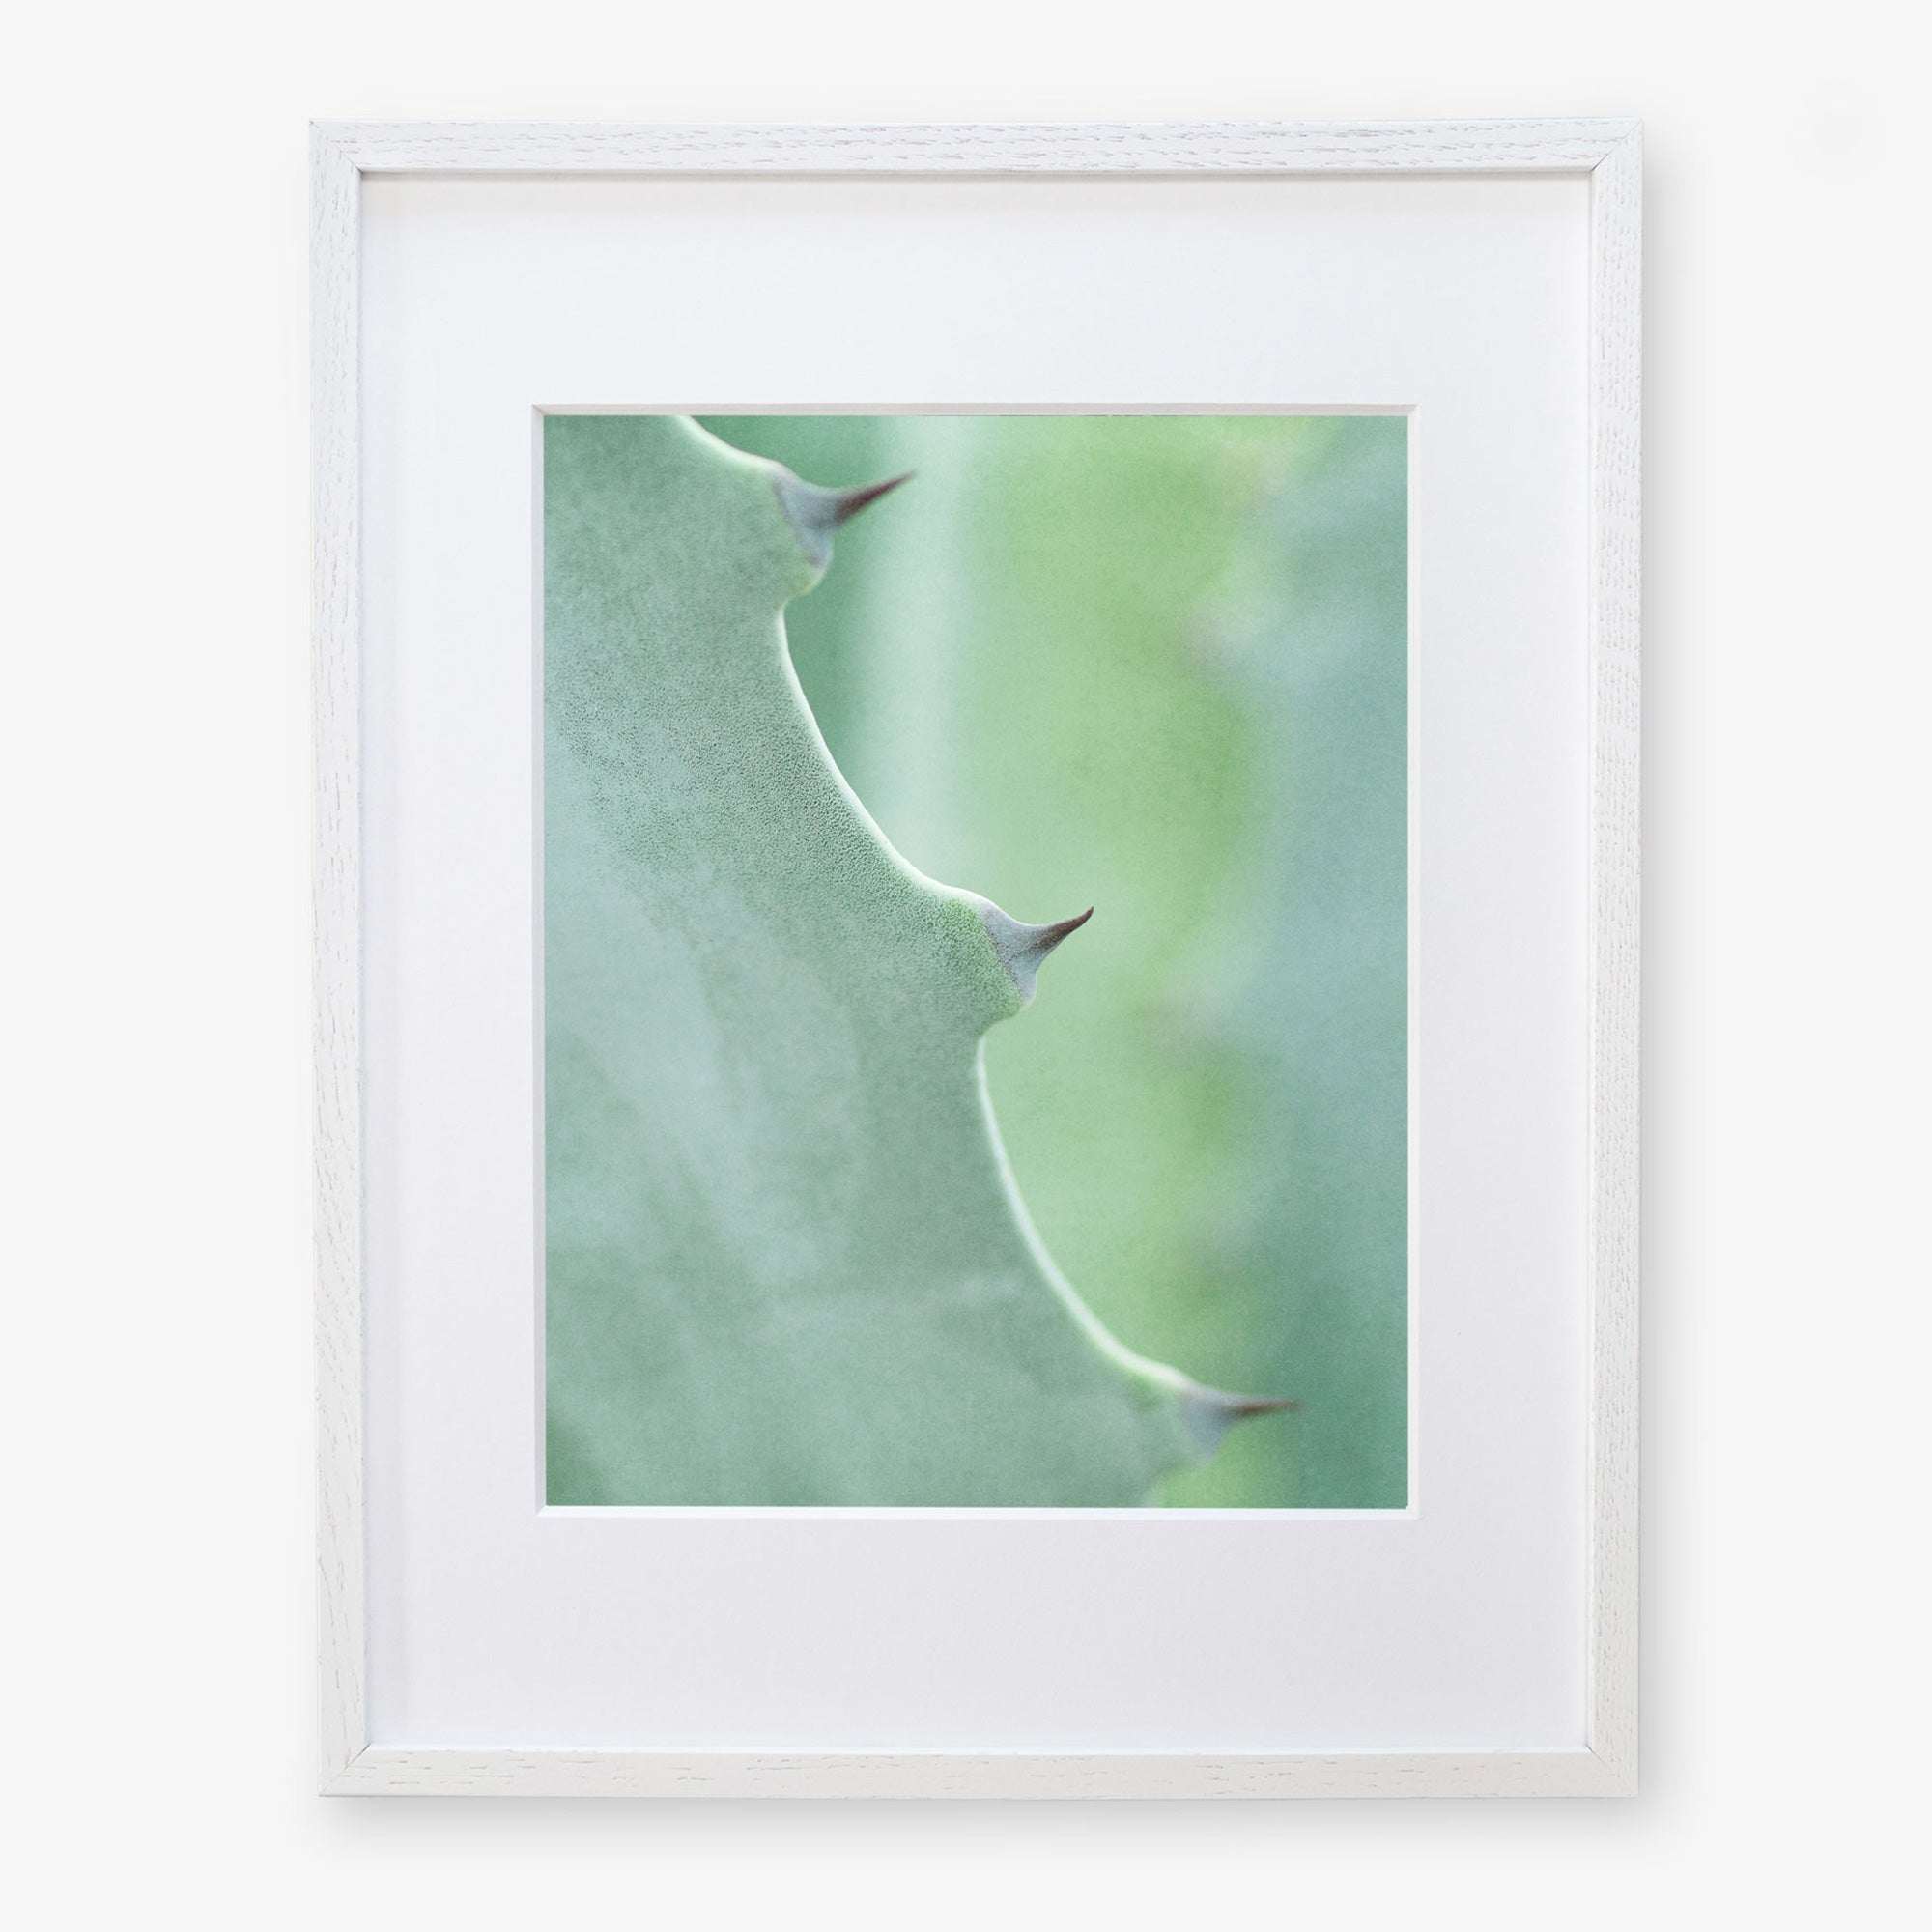 A close-up photo of a Green Botanical Print, &#39;Aloe Vera Spikes II&#39; from Offley Green, showing sharp thorns and green texture, framed in a simple white border, mounted on archival photographic paper.